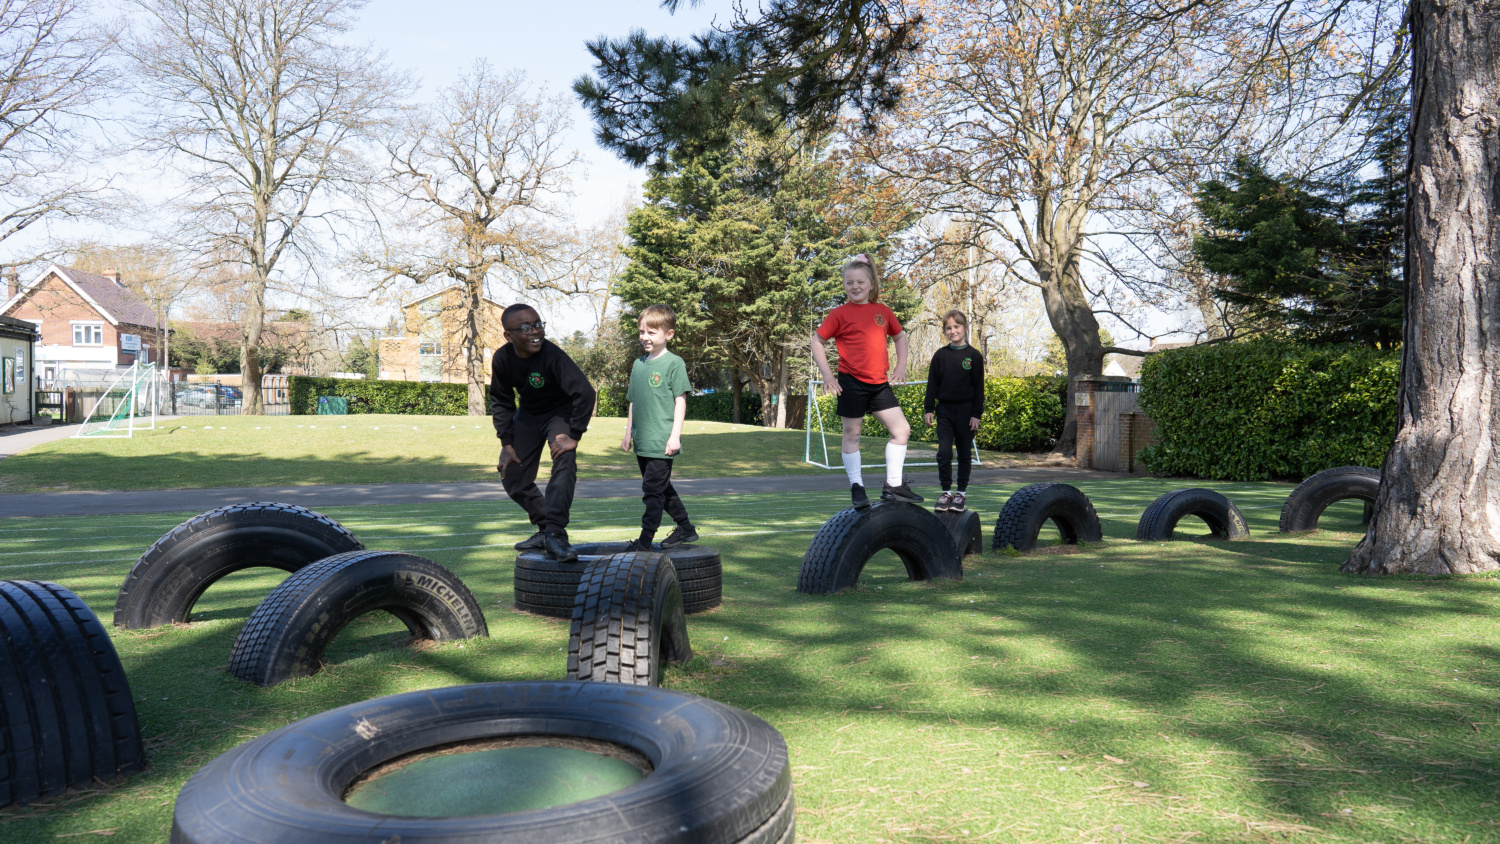 Four children playing on tyres in the school playground